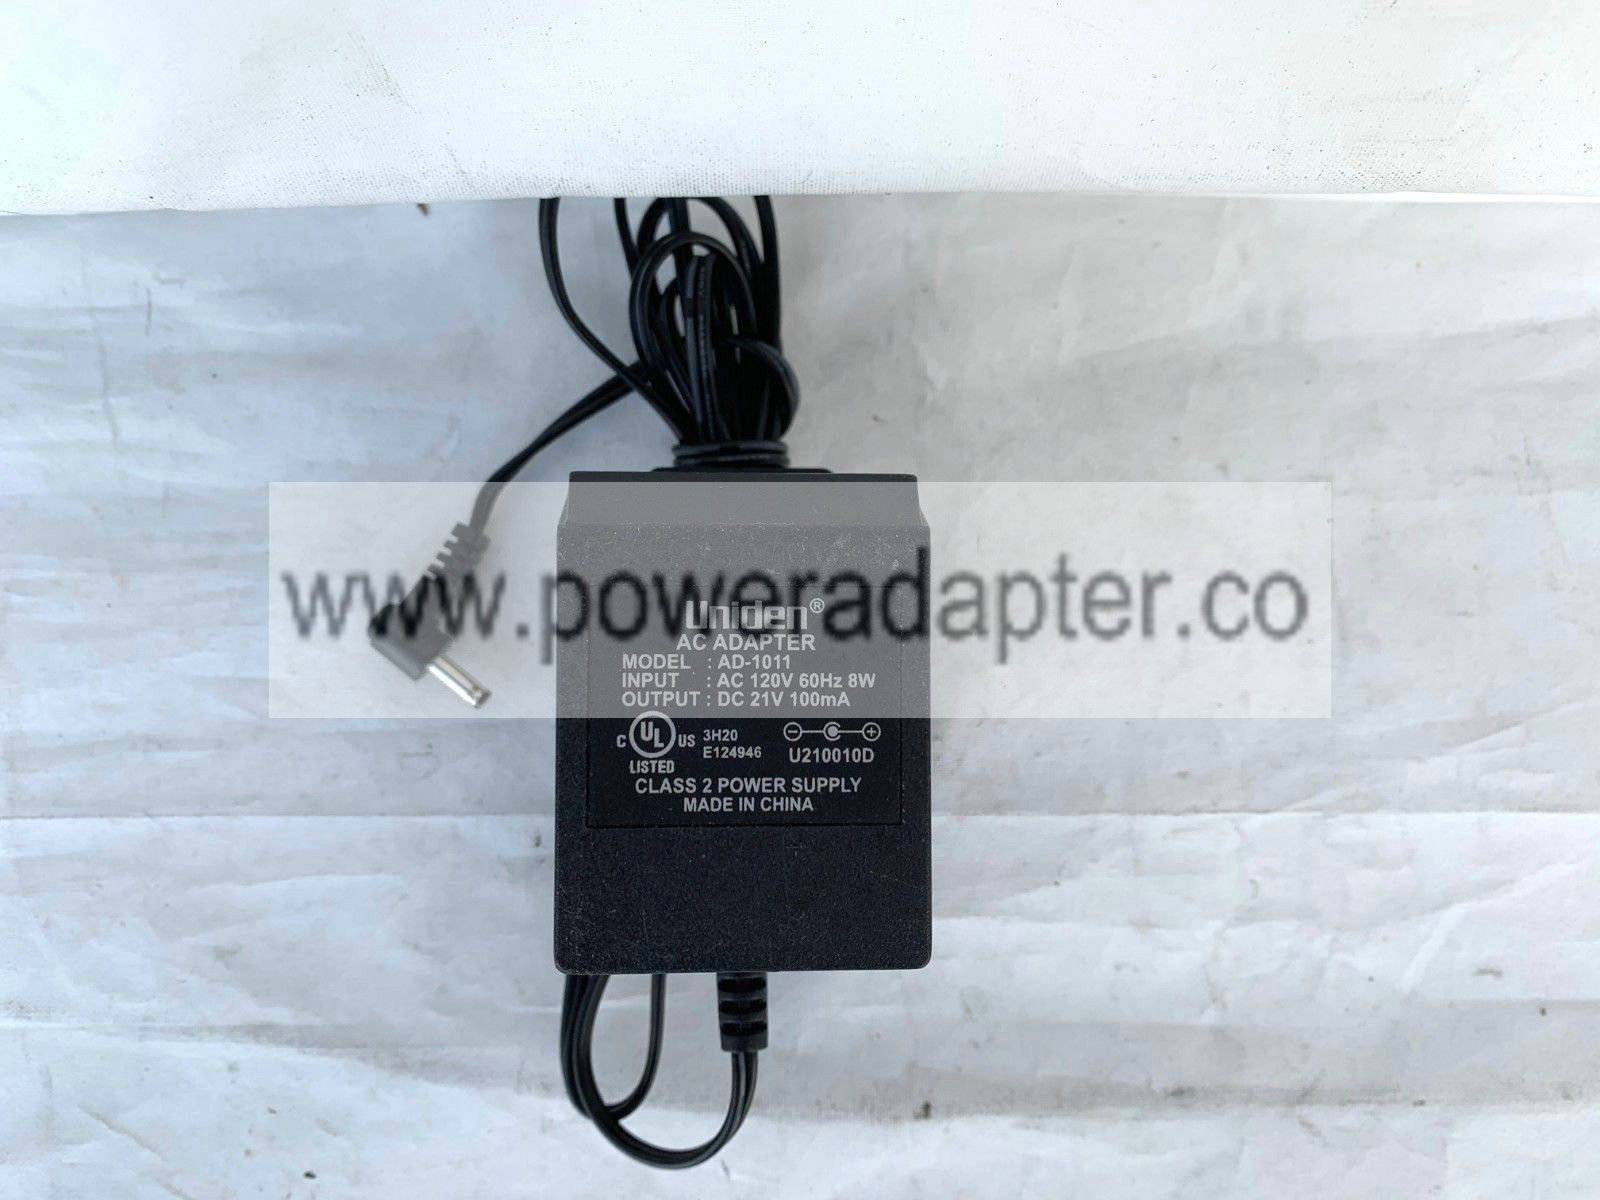 UNIDEN AC ADAPTER AD-1011 INPUT AC 120V 60HZ 8W OUTPUT DC 21V 100MA Condition: new Country/Region of Manufacture: Ch